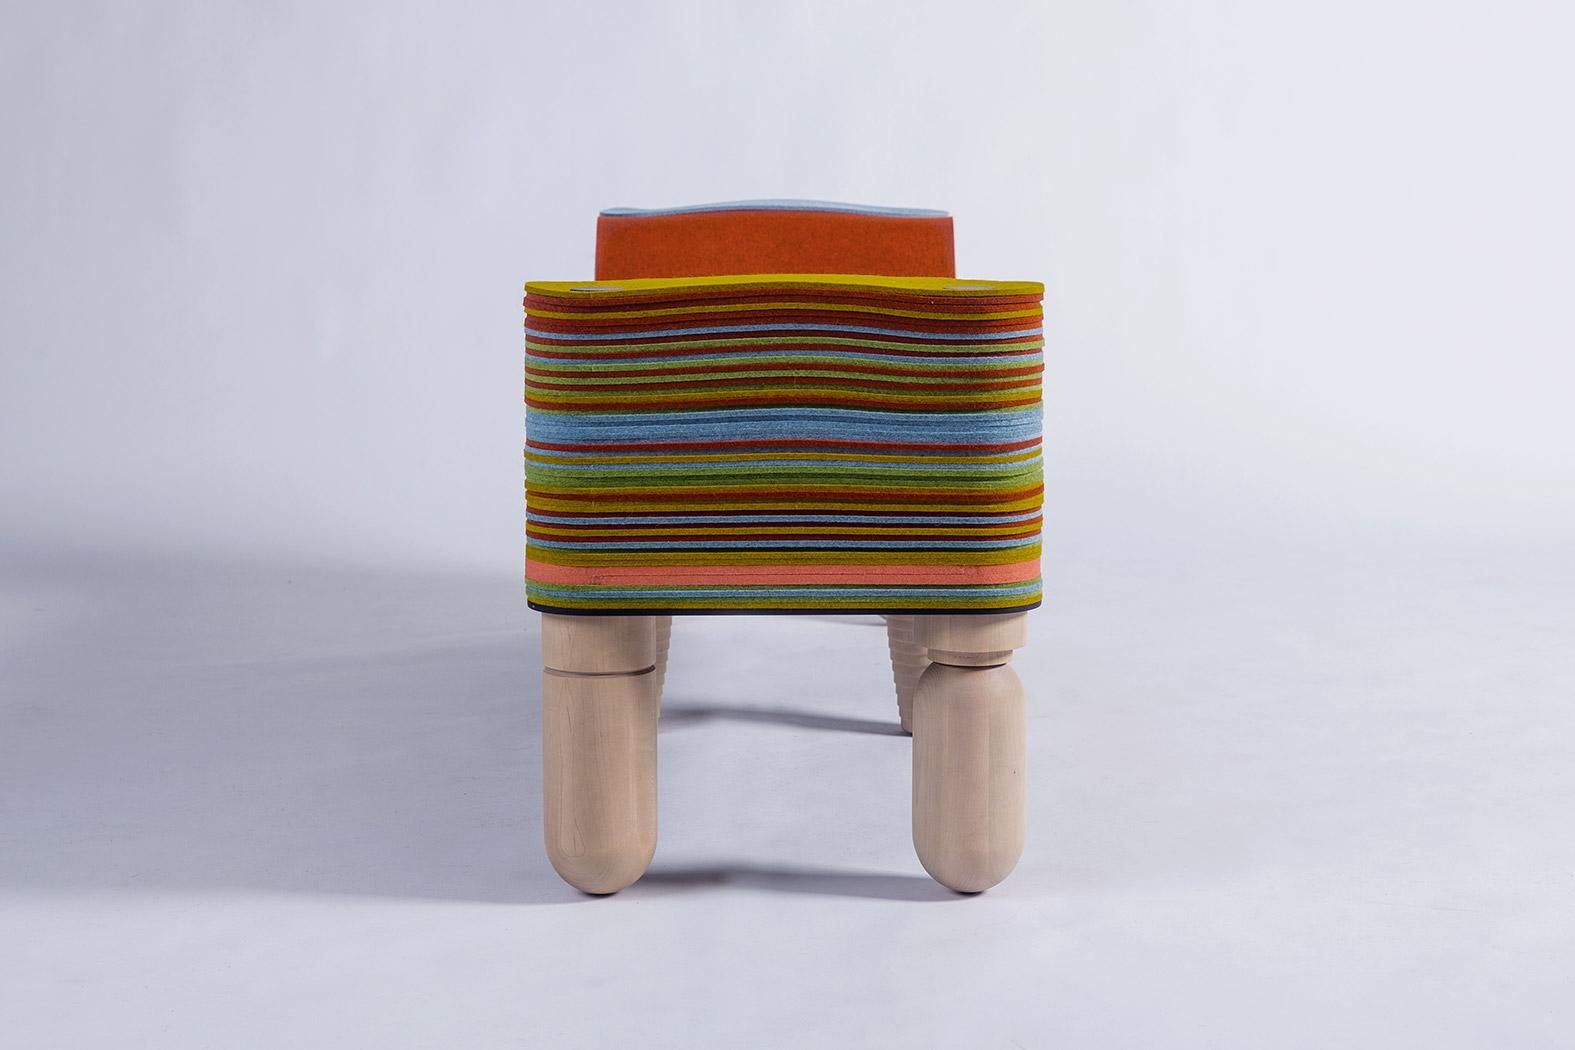 Maxine B, Felt and Wood Bench, Benoist F. Drut in STACKABL, Canada, 2021 In Excellent Condition For Sale In New York, NY